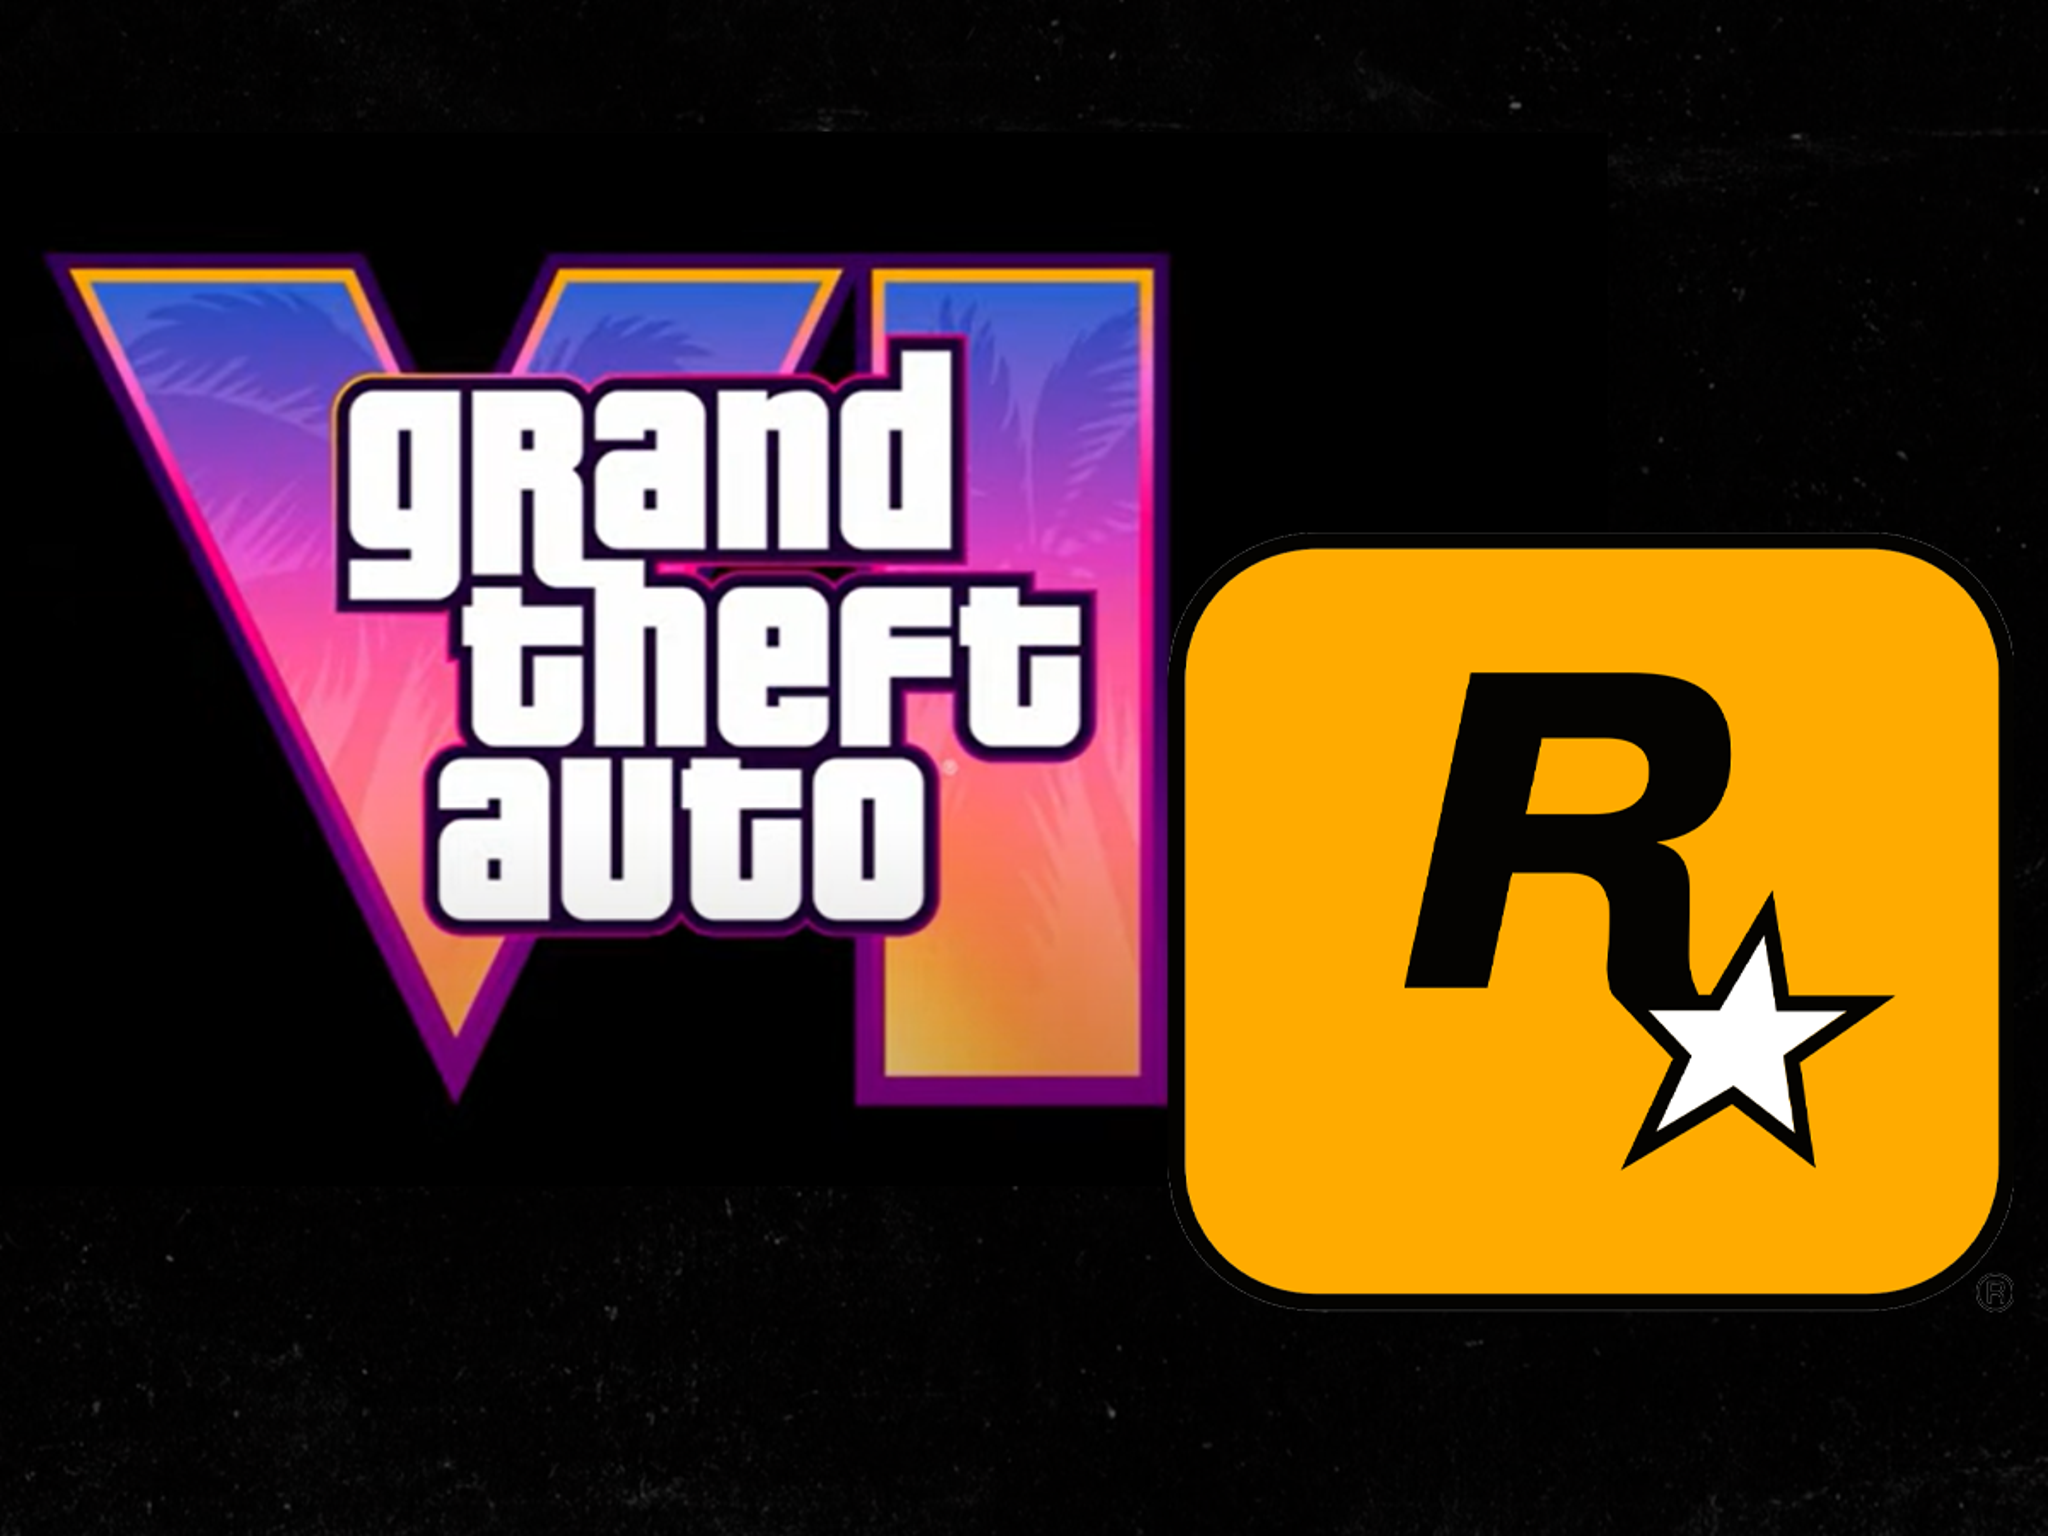 GTA 6 trailer release: The wait is over! After 10 years, Rockstar